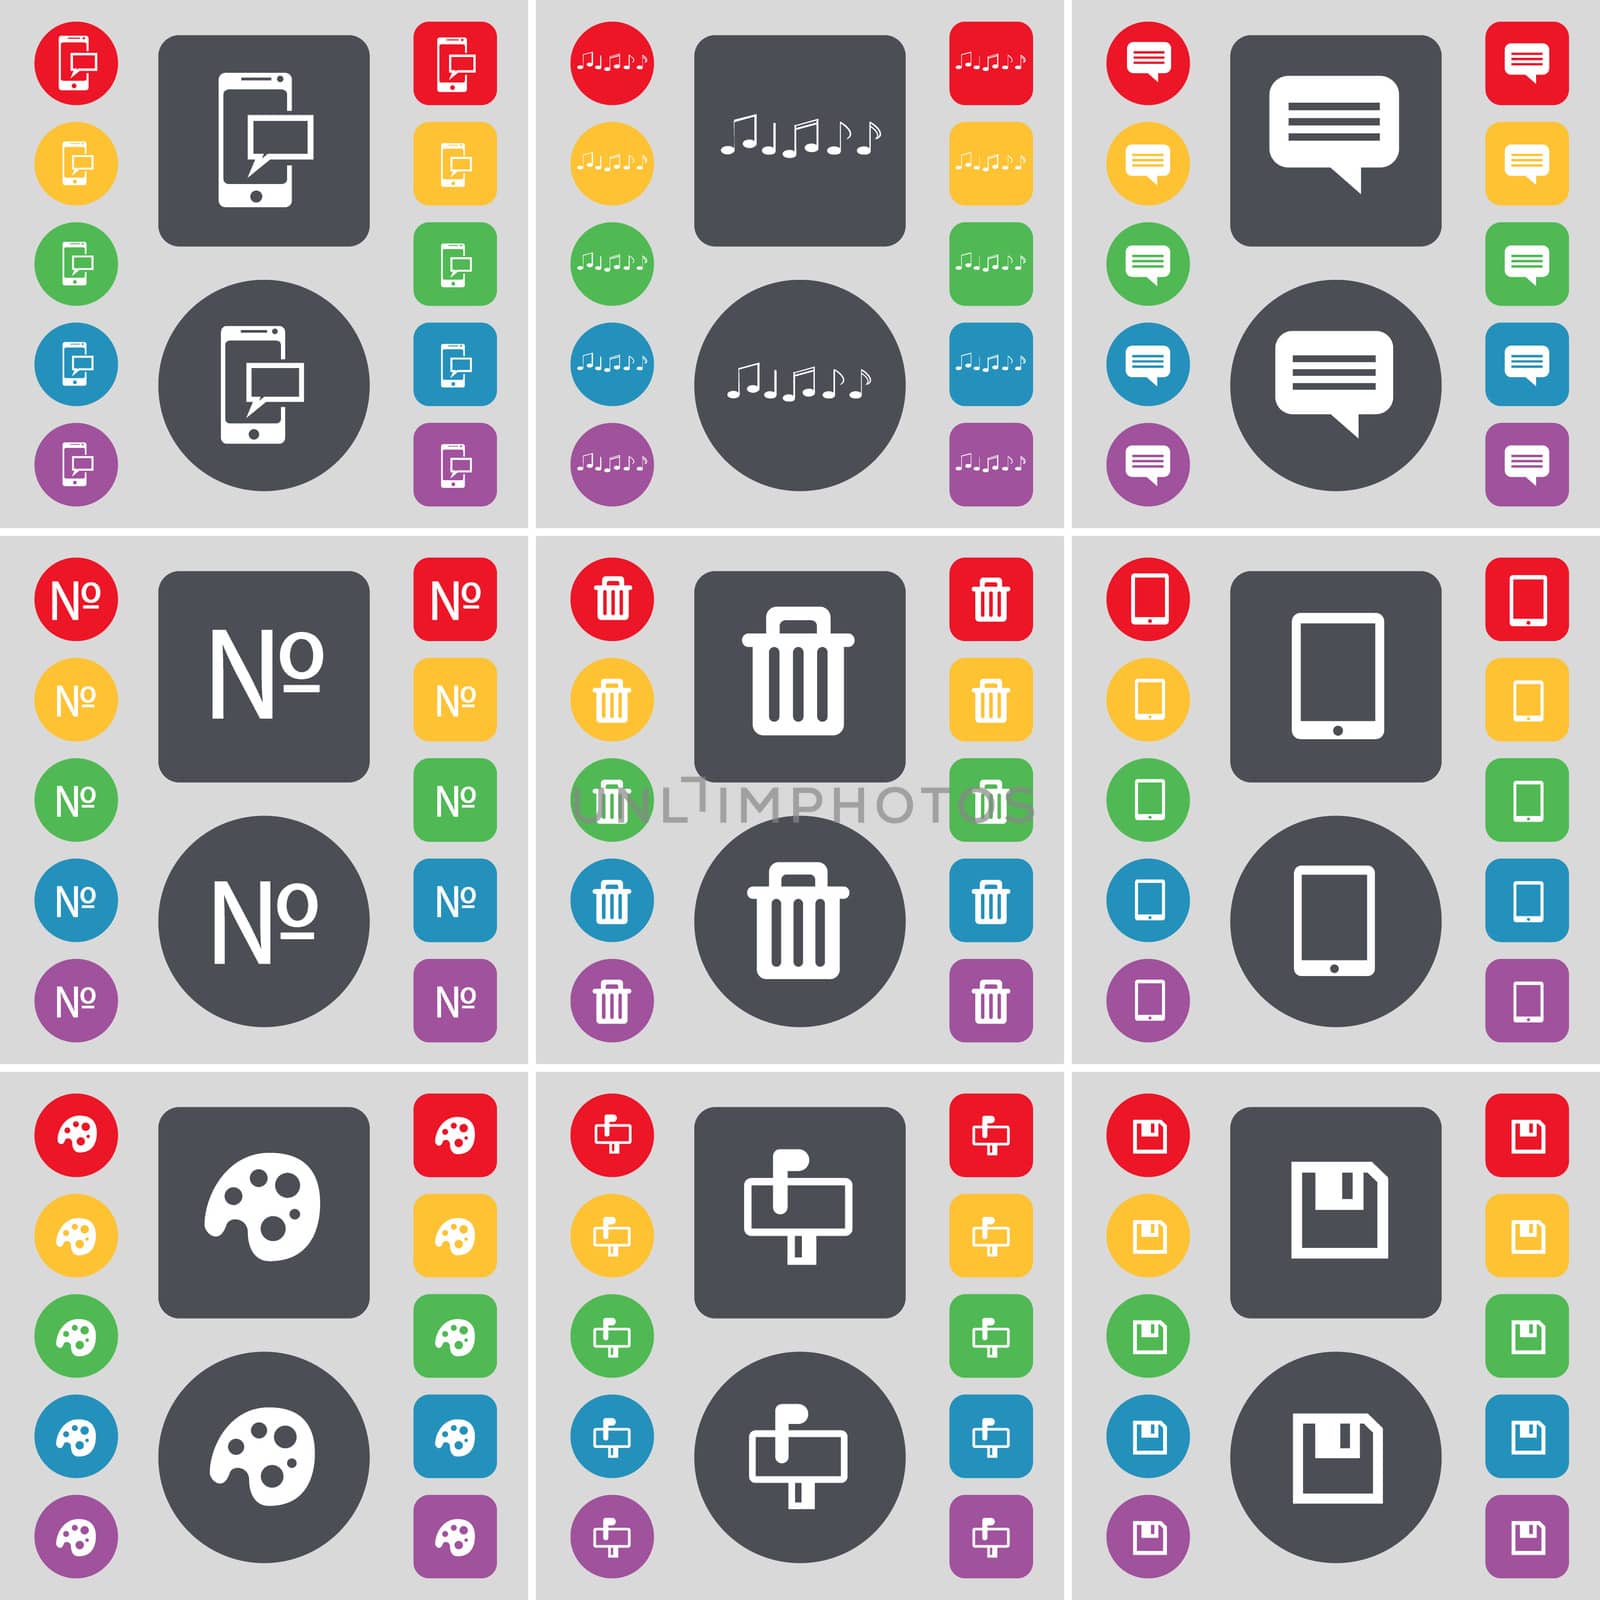 SMS, Note, Chat bubble, Number, Trash can, Tablet PC, Palette, Mailbox, Floppy icon symbol. A large set of flat, colored buttons for your design. illustration